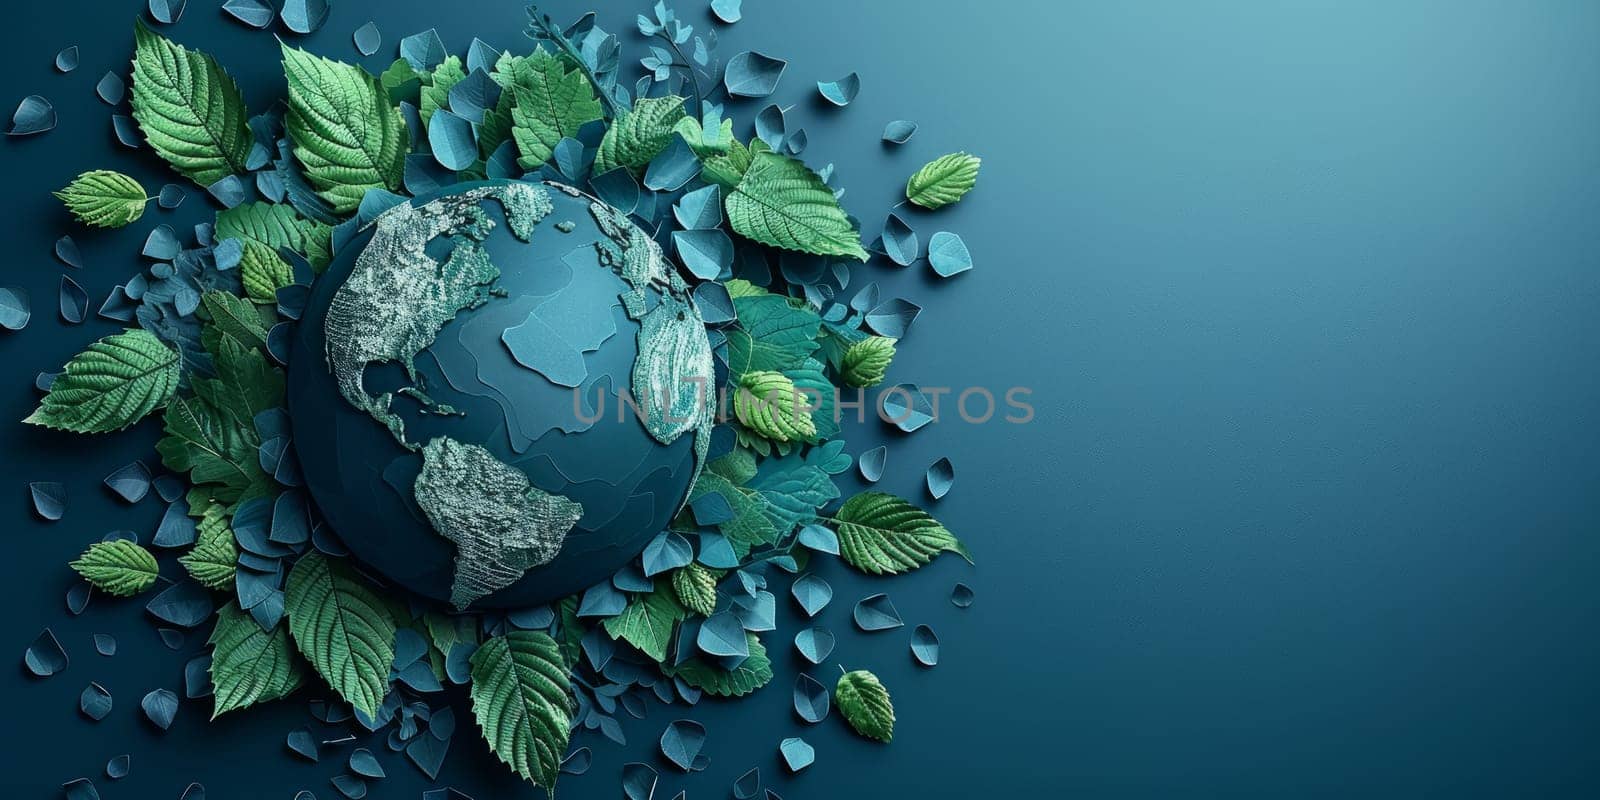 Earth Day concept with green leaves and water droplets surrounding planet Earth. Environmental conservation and eco friendly lifestyle awareness.